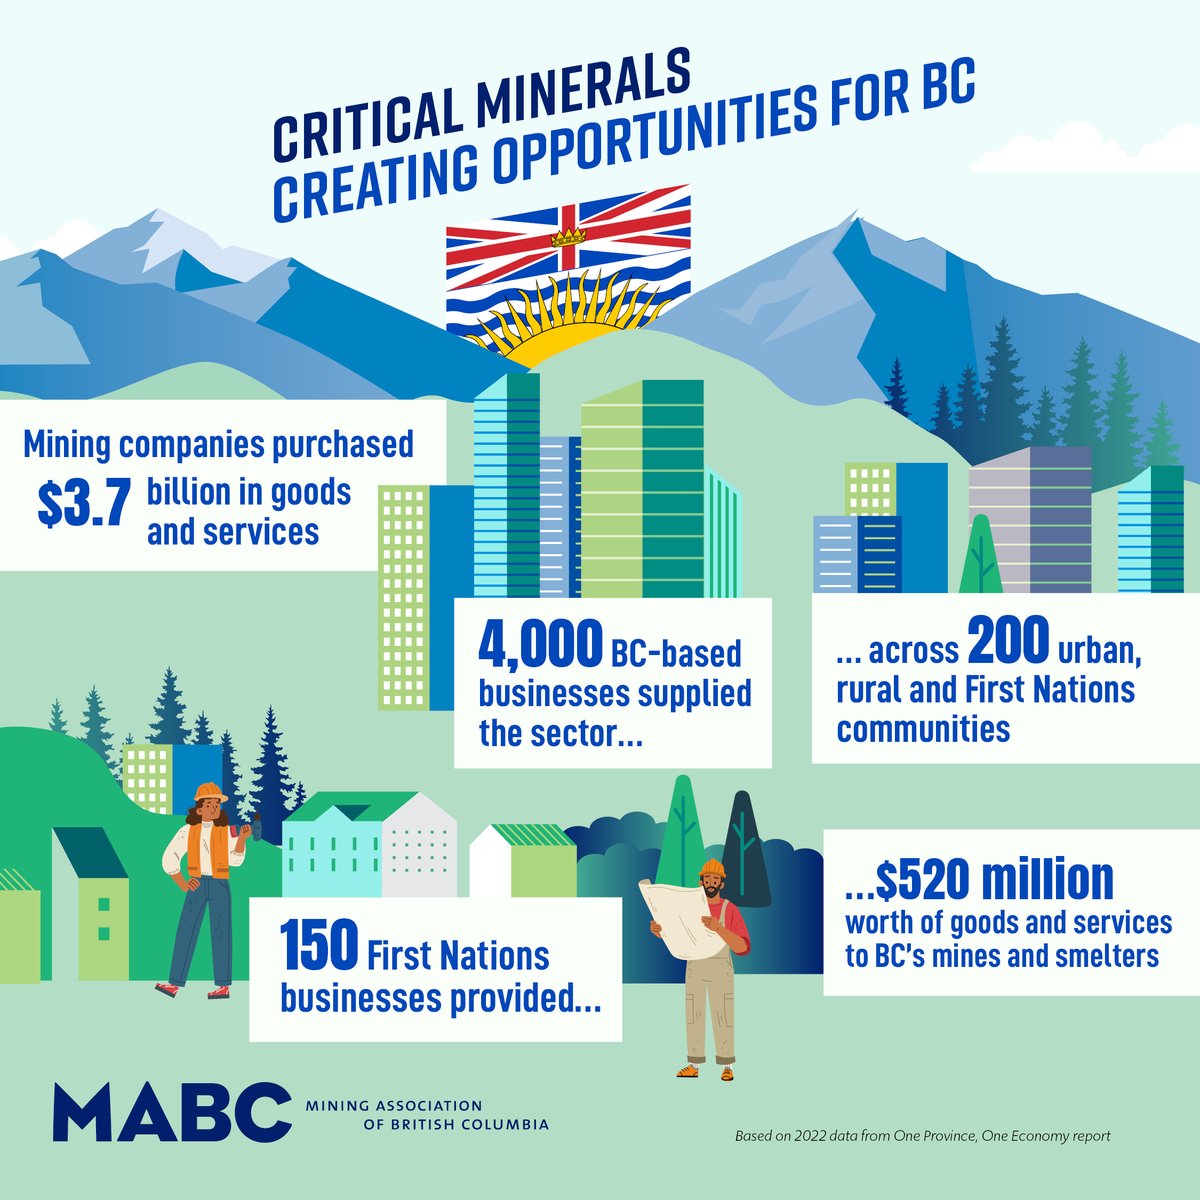 #MiningMonth – The Time Is Now For Building Prosperous Communities

Did you know BC’s mining sector plays a key role in supporting people & prosperity in communities?

More details can be found in our One Province, One Economy report: mining.bc.ca/2024/01/one-pr…

#CriticalMinerals